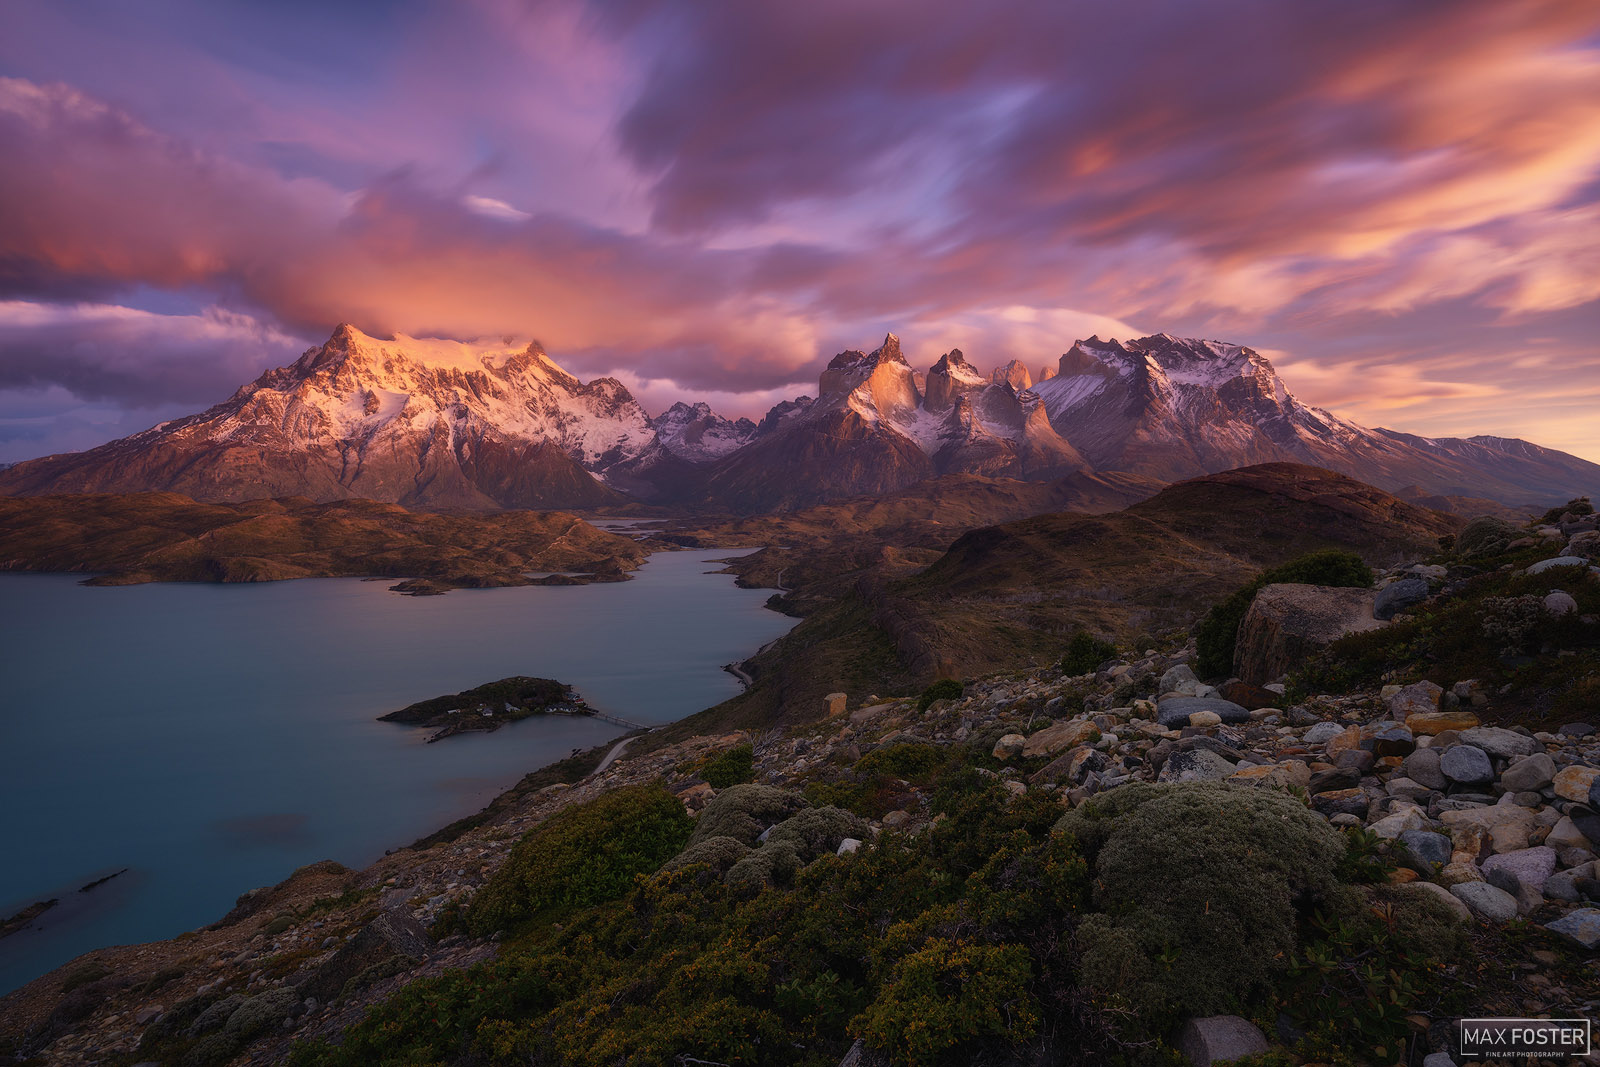 Transform your living space with Supreme Elevation, Max Foster's limited edition photography print of Torres Del Paine National...